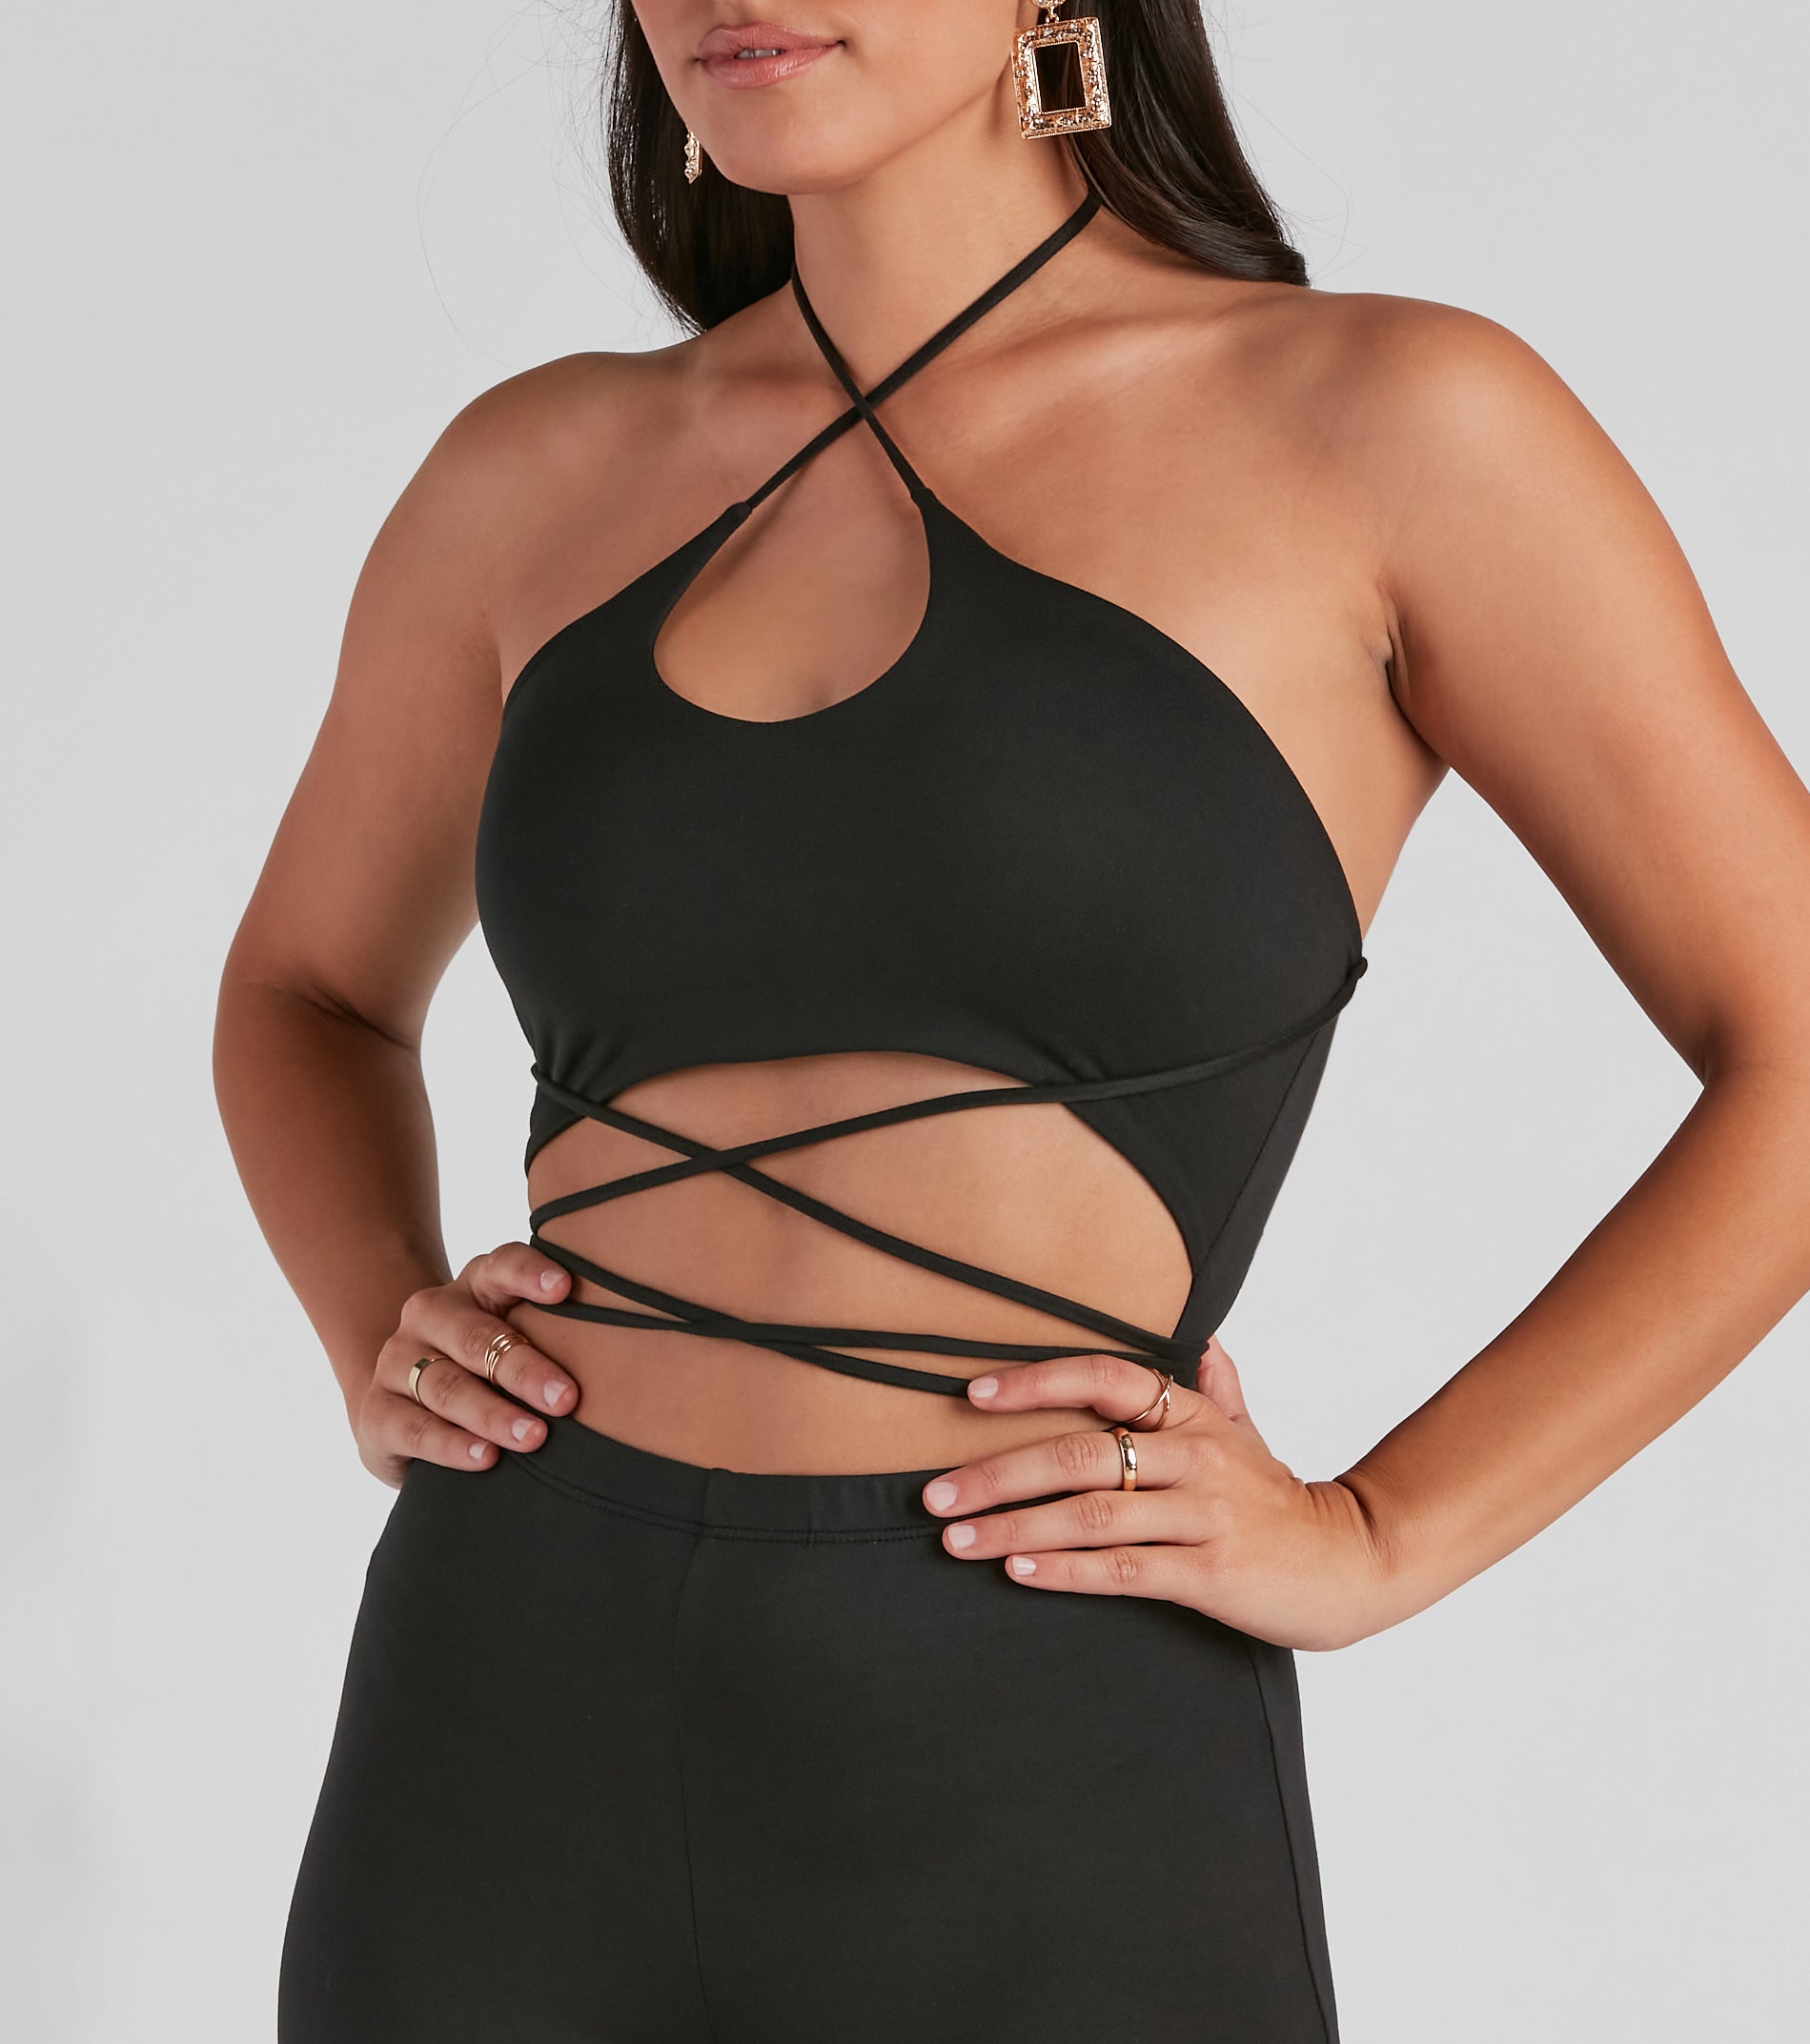 So Fab Halter Strappy Knit Jumpsuit